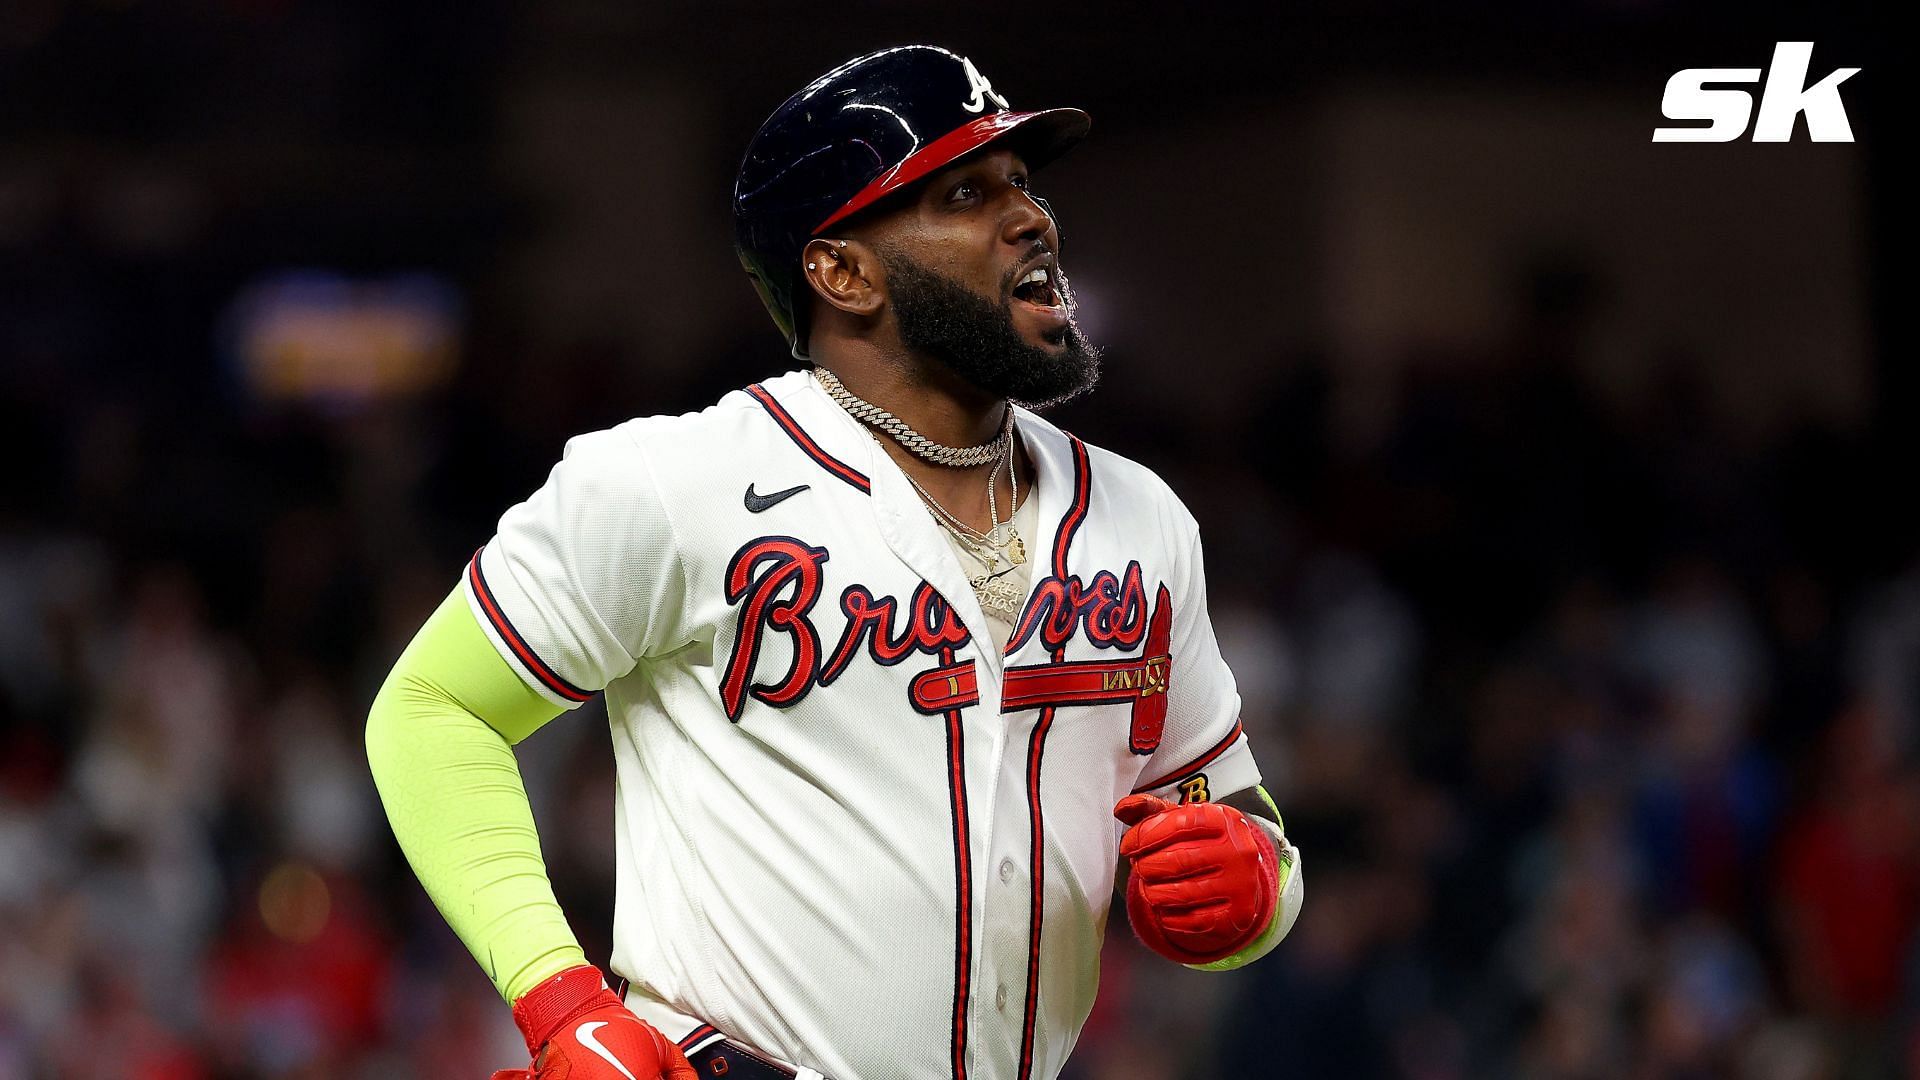 Marcell Ozuna leaves game after HBP on hand (UPDATED) - Battery Power